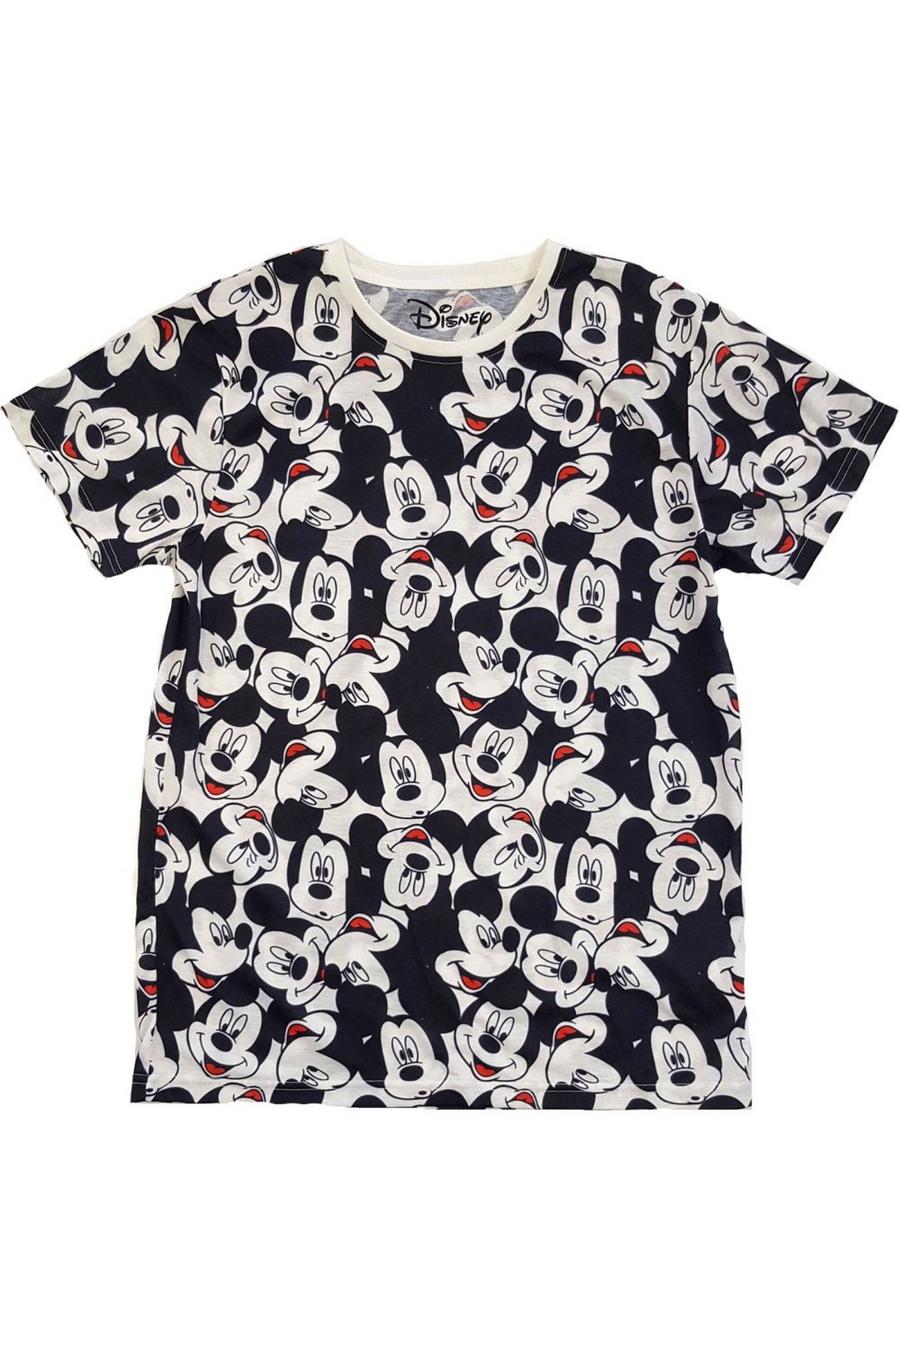 Black Mickey Mouse All-Over Print Friday Version Short Sleeve T-Shirt